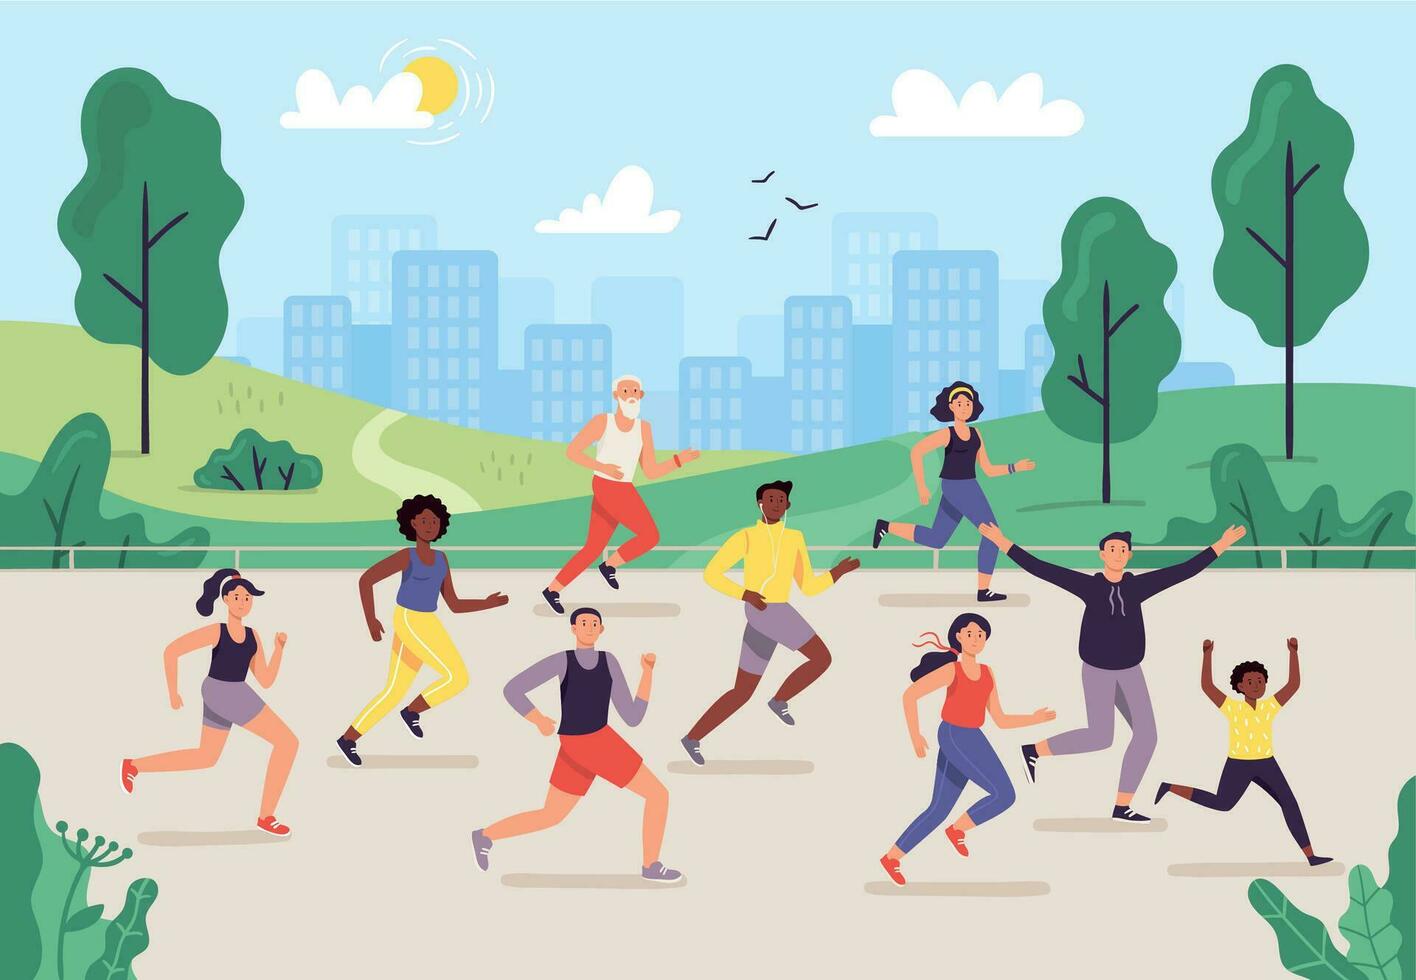 Park marathon. People running outdoor, joggers group and sport lifestyle. Jogging vector illustration